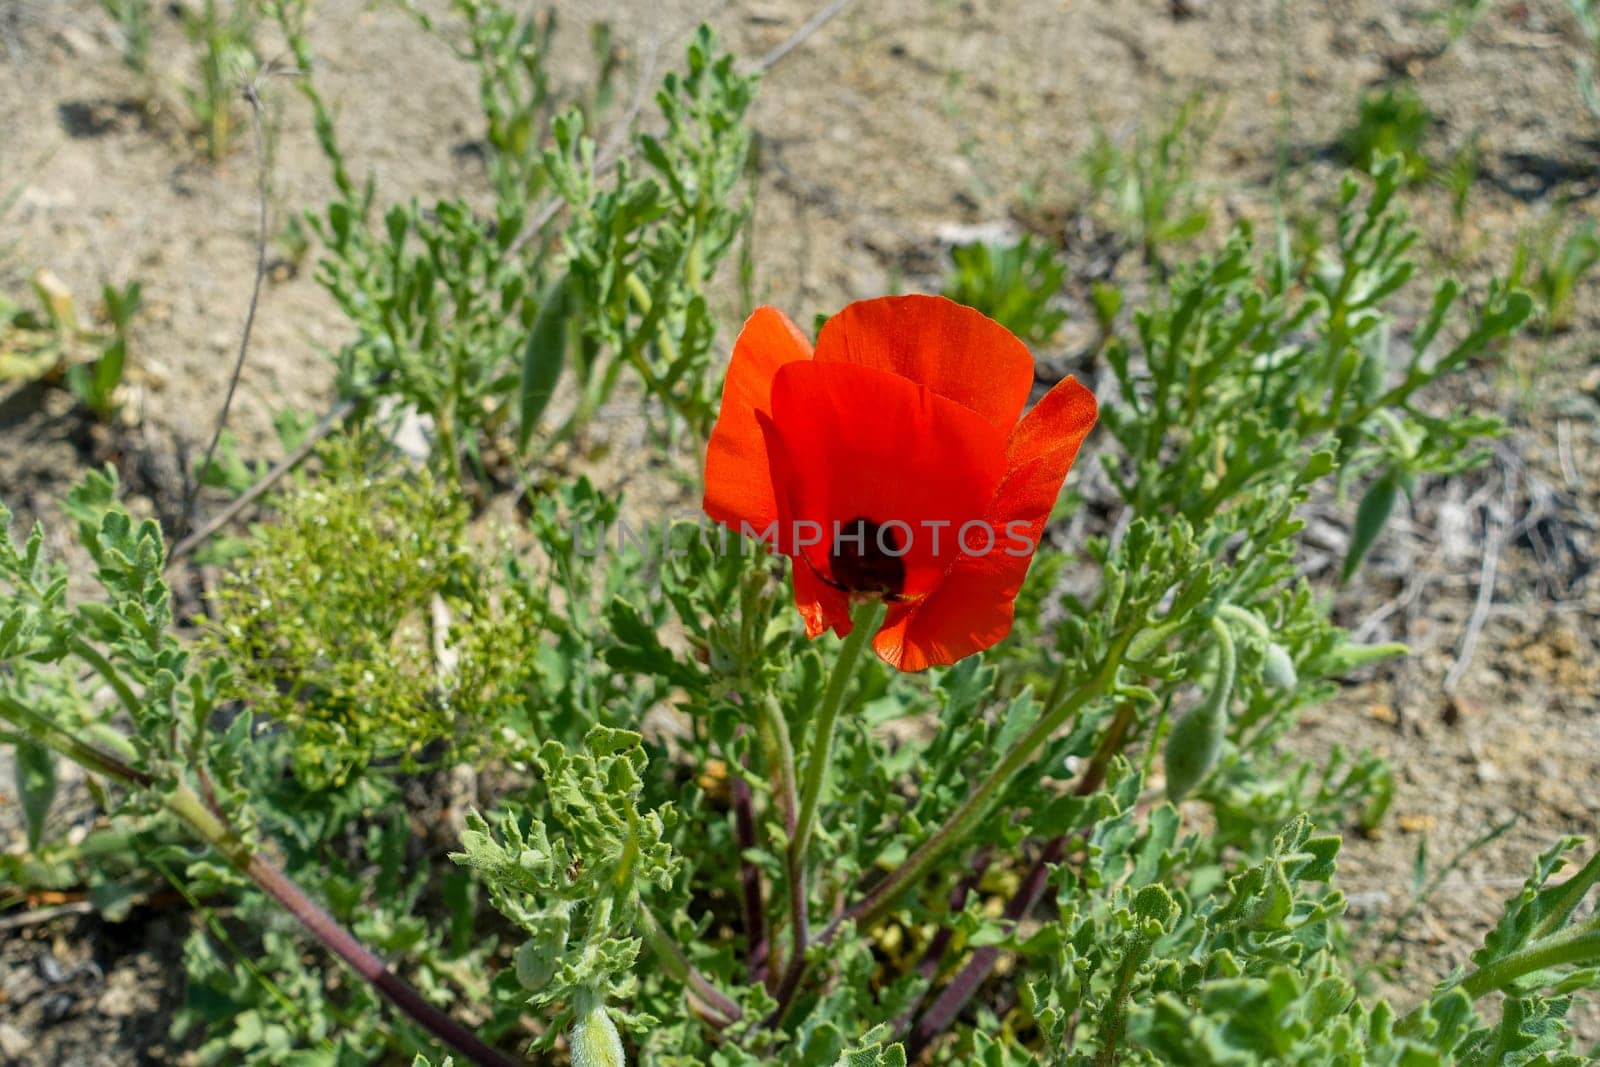 Poppy flowers, new blooming in nature, red -black poppy flowers, by nhatipoglu